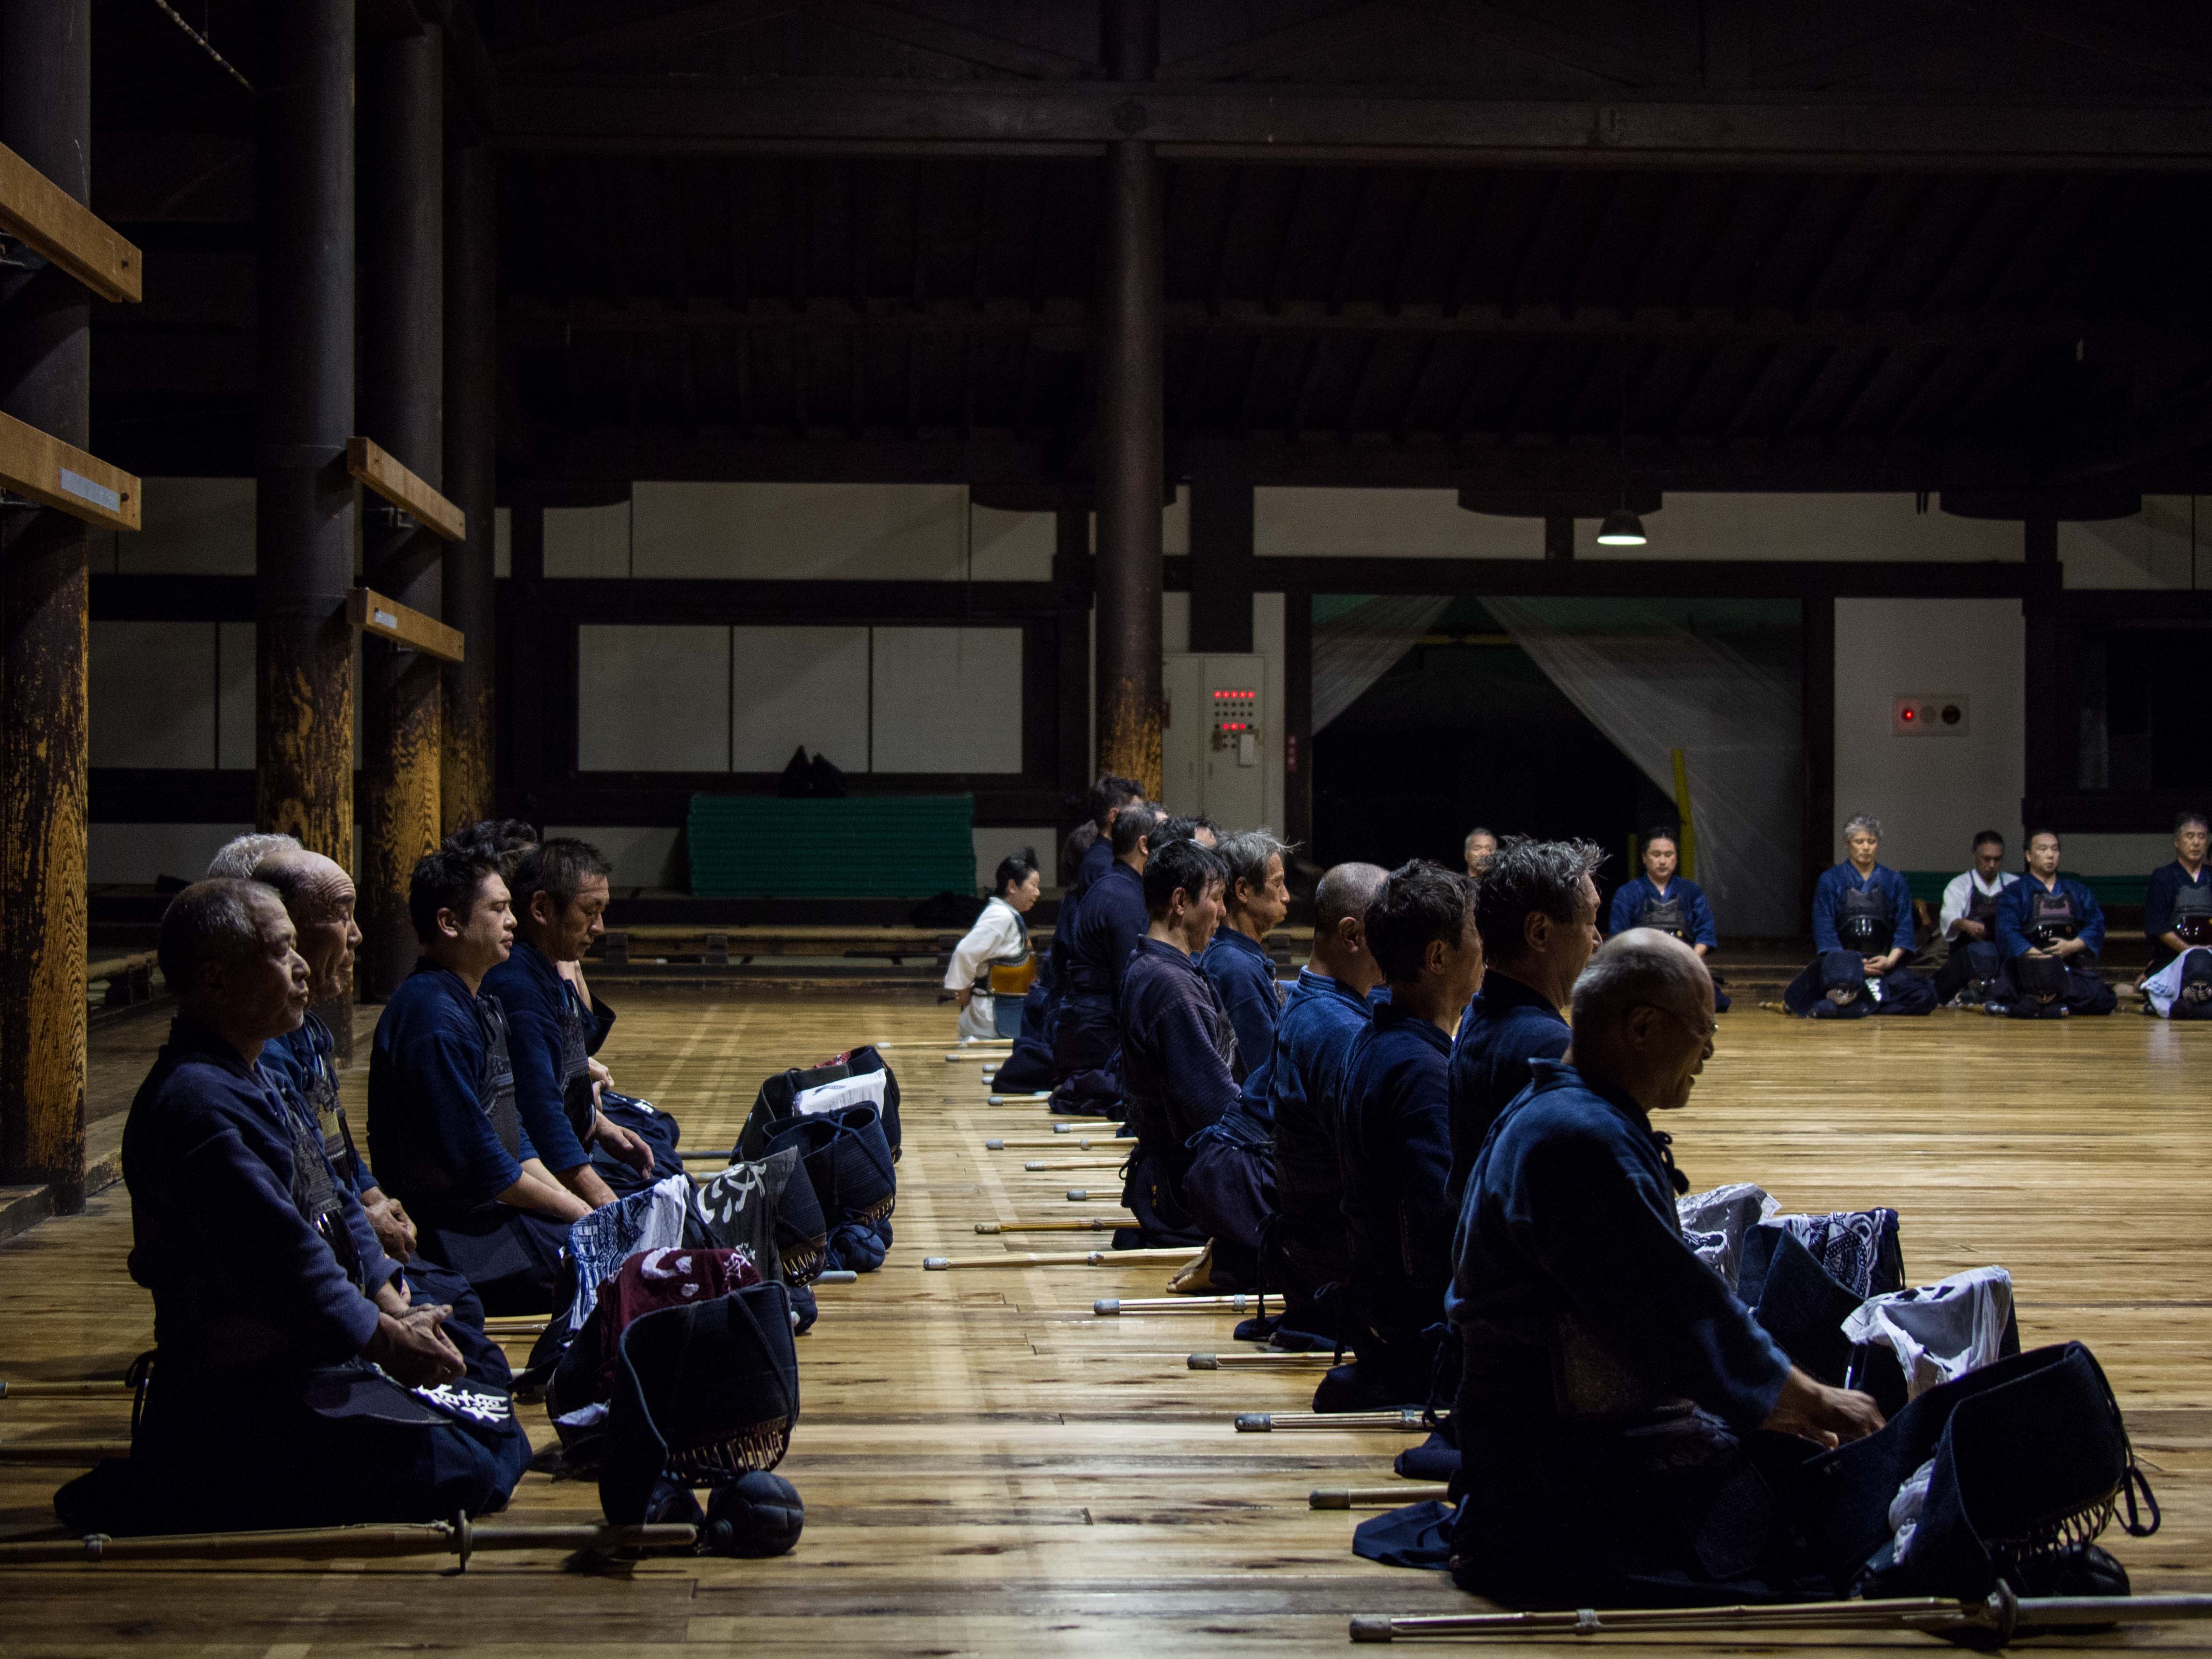 It is very much part of Japanese martial arts traditions to reflect and recenter the mind after battle.